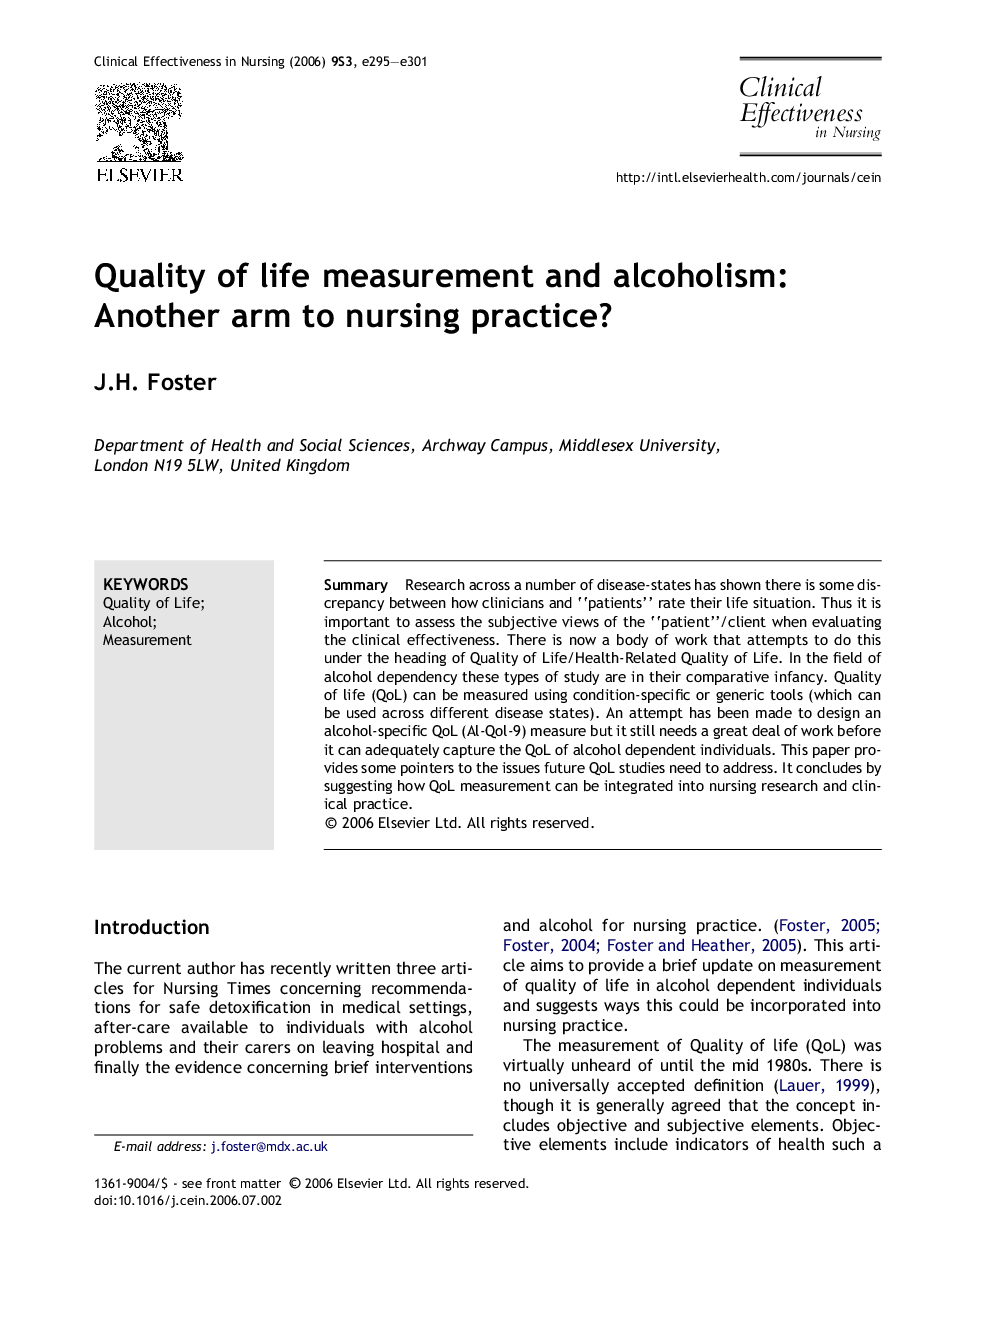 Quality of life measurement and alcoholism: Another arm to nursing practice?